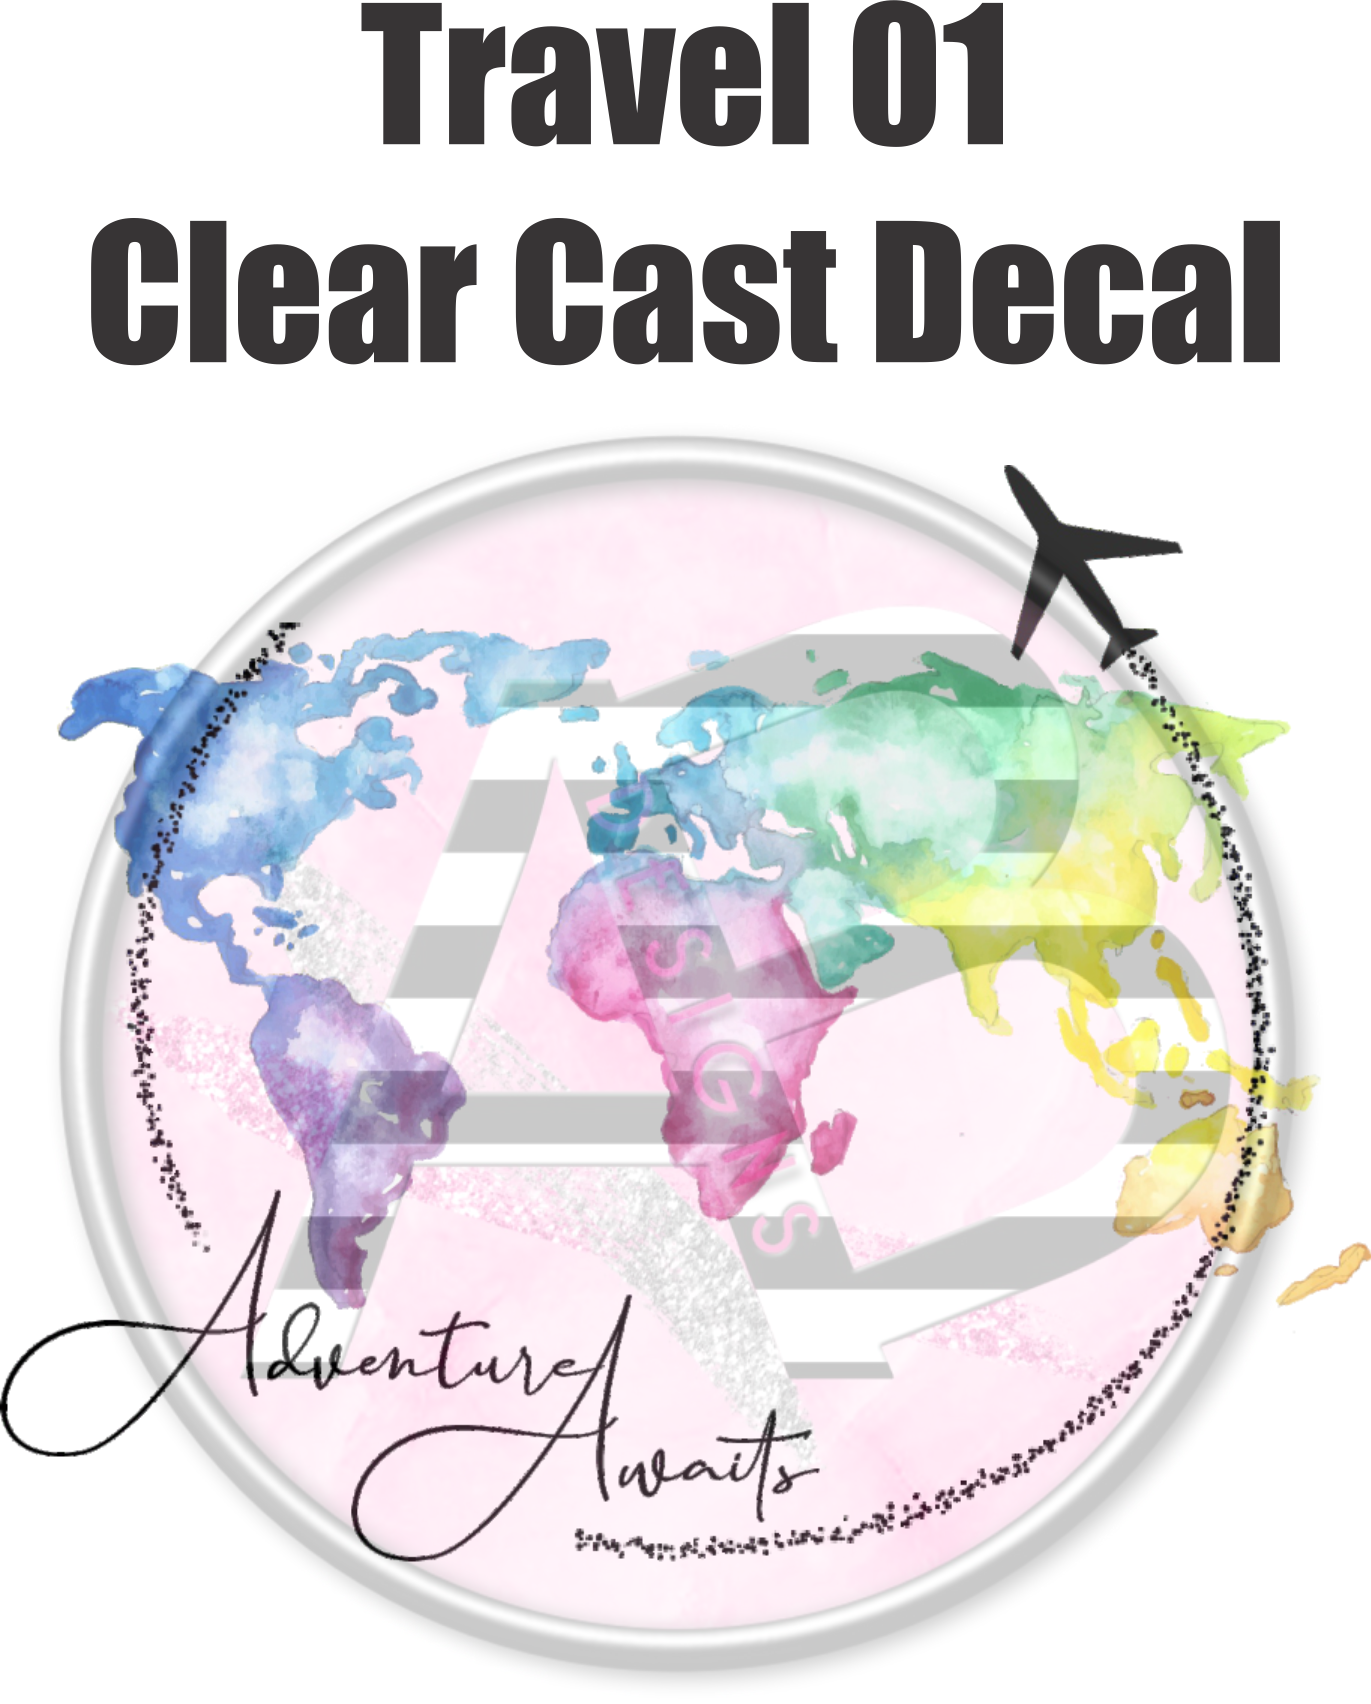 Travel 01 - Clear Cast Decal